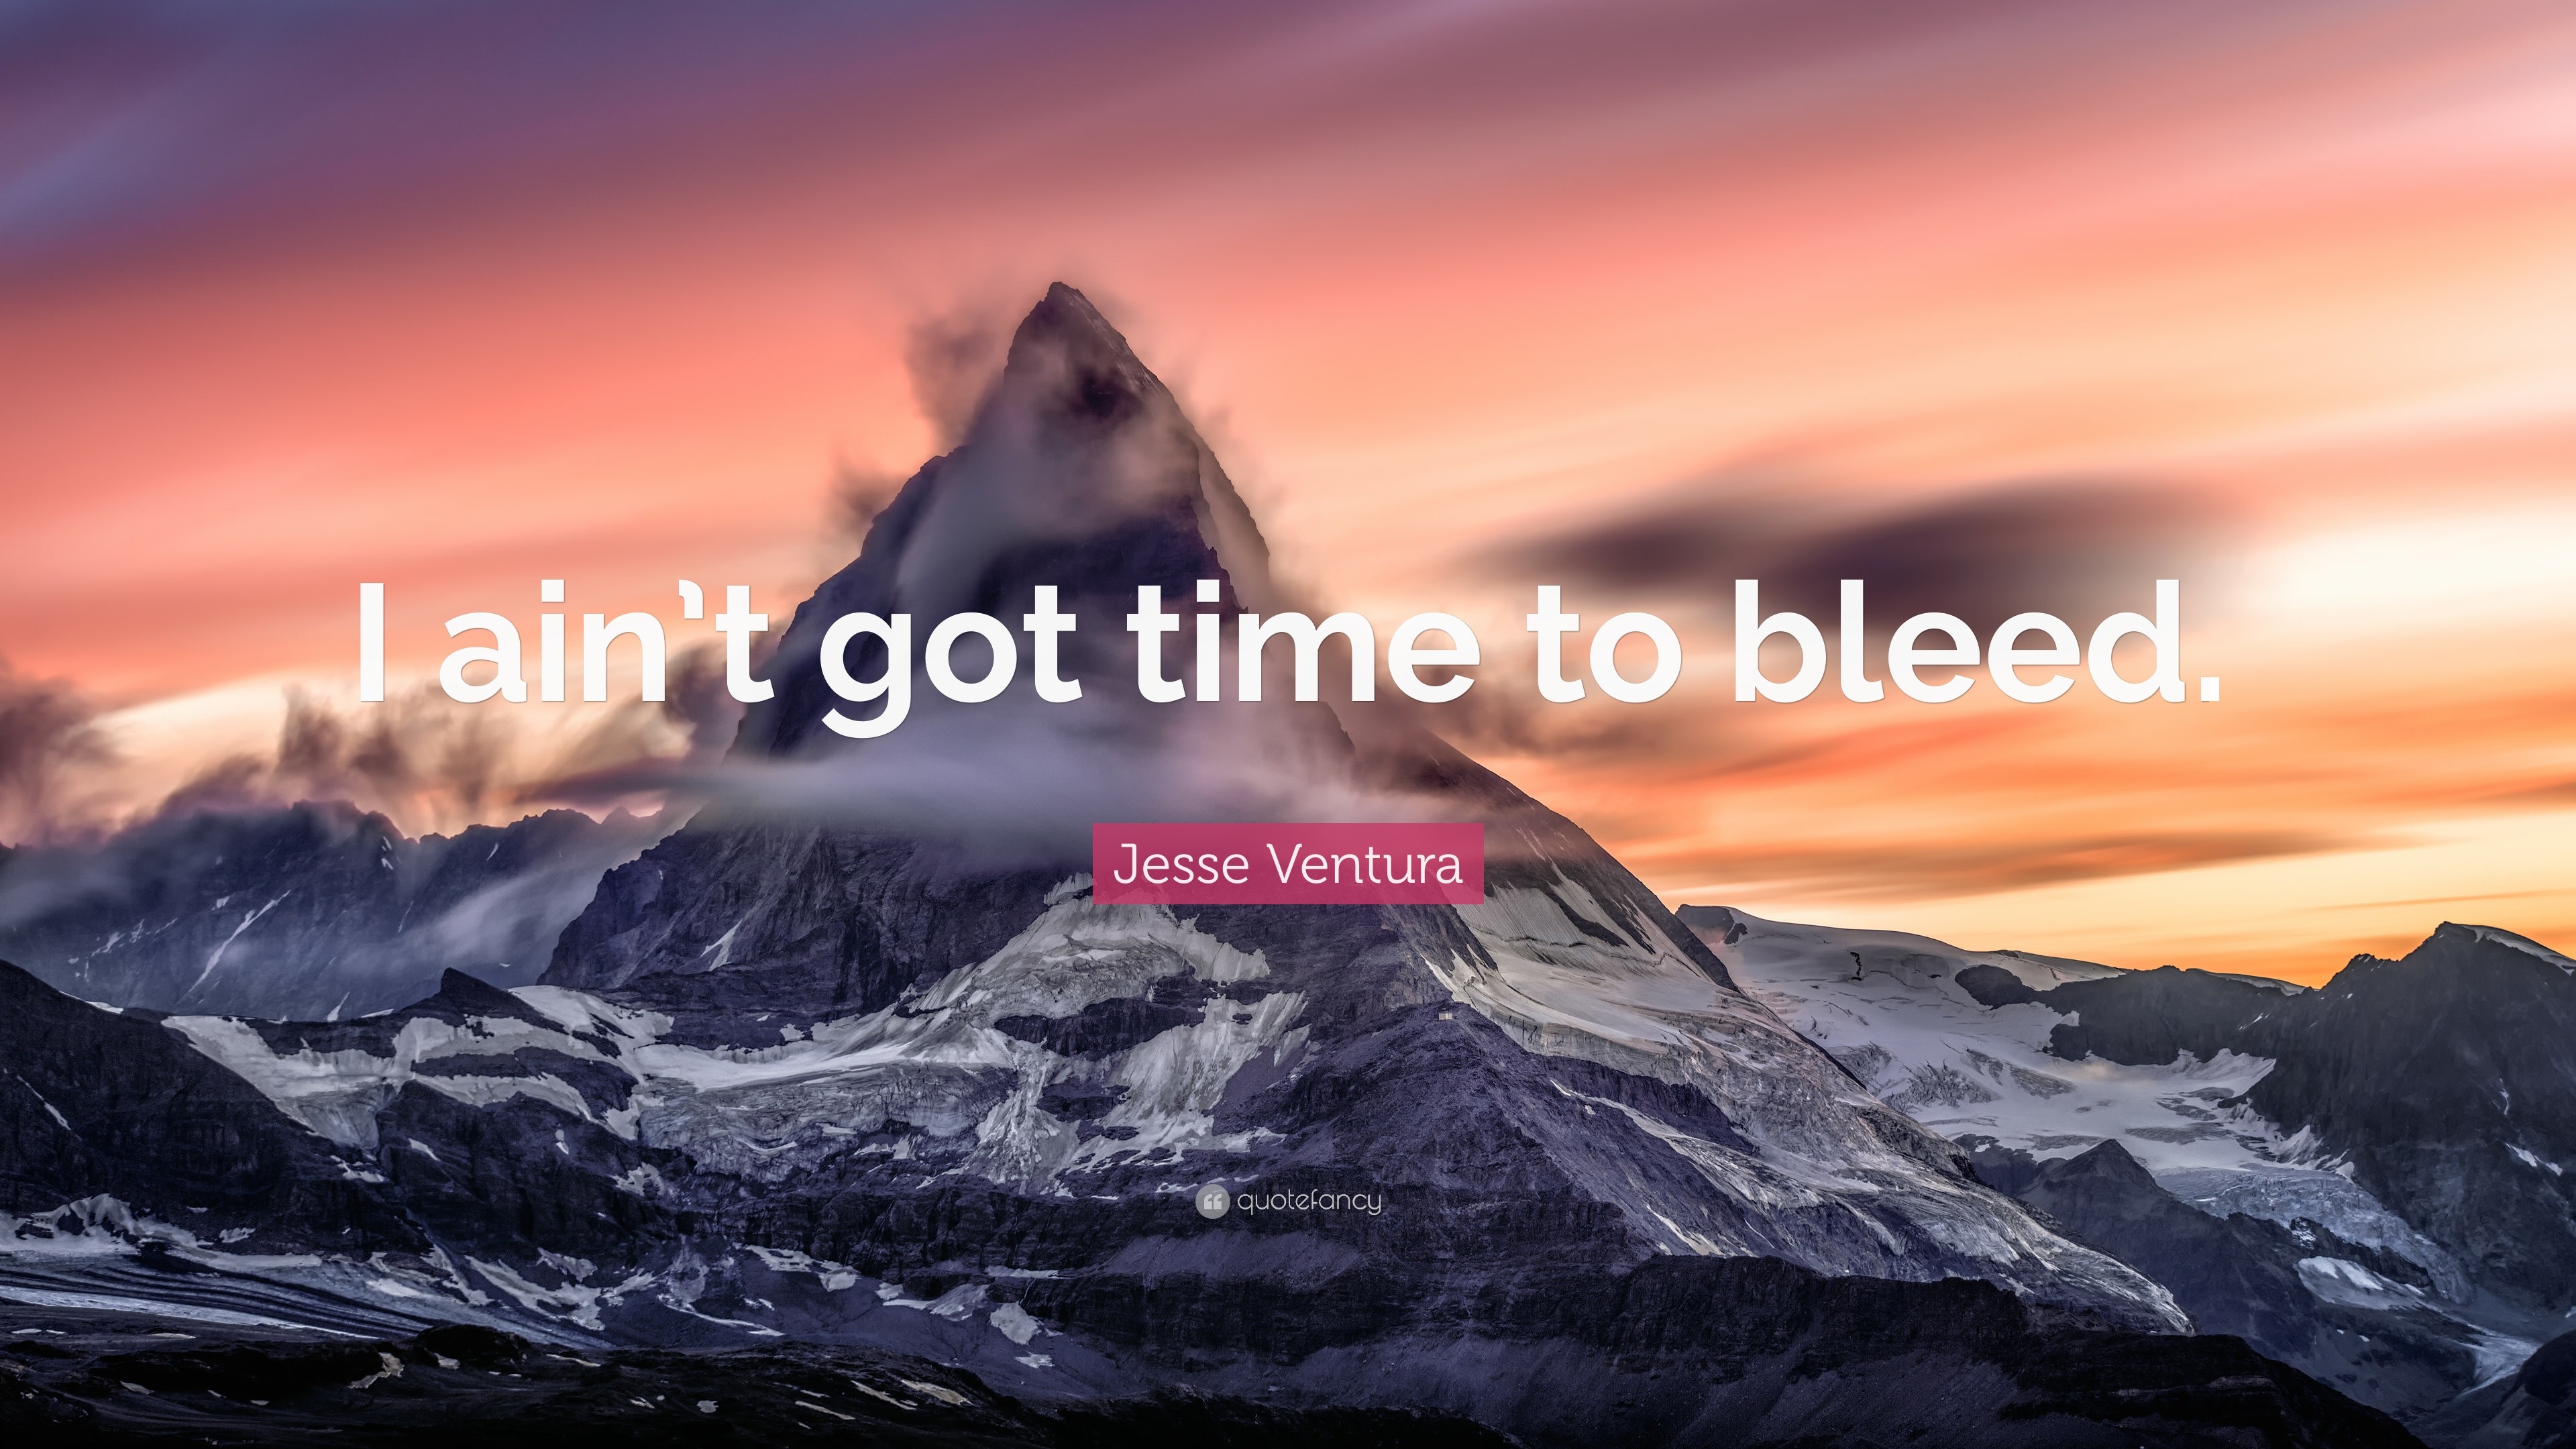 Jesse Ventura Quote: “I ain't got time to bleed.”